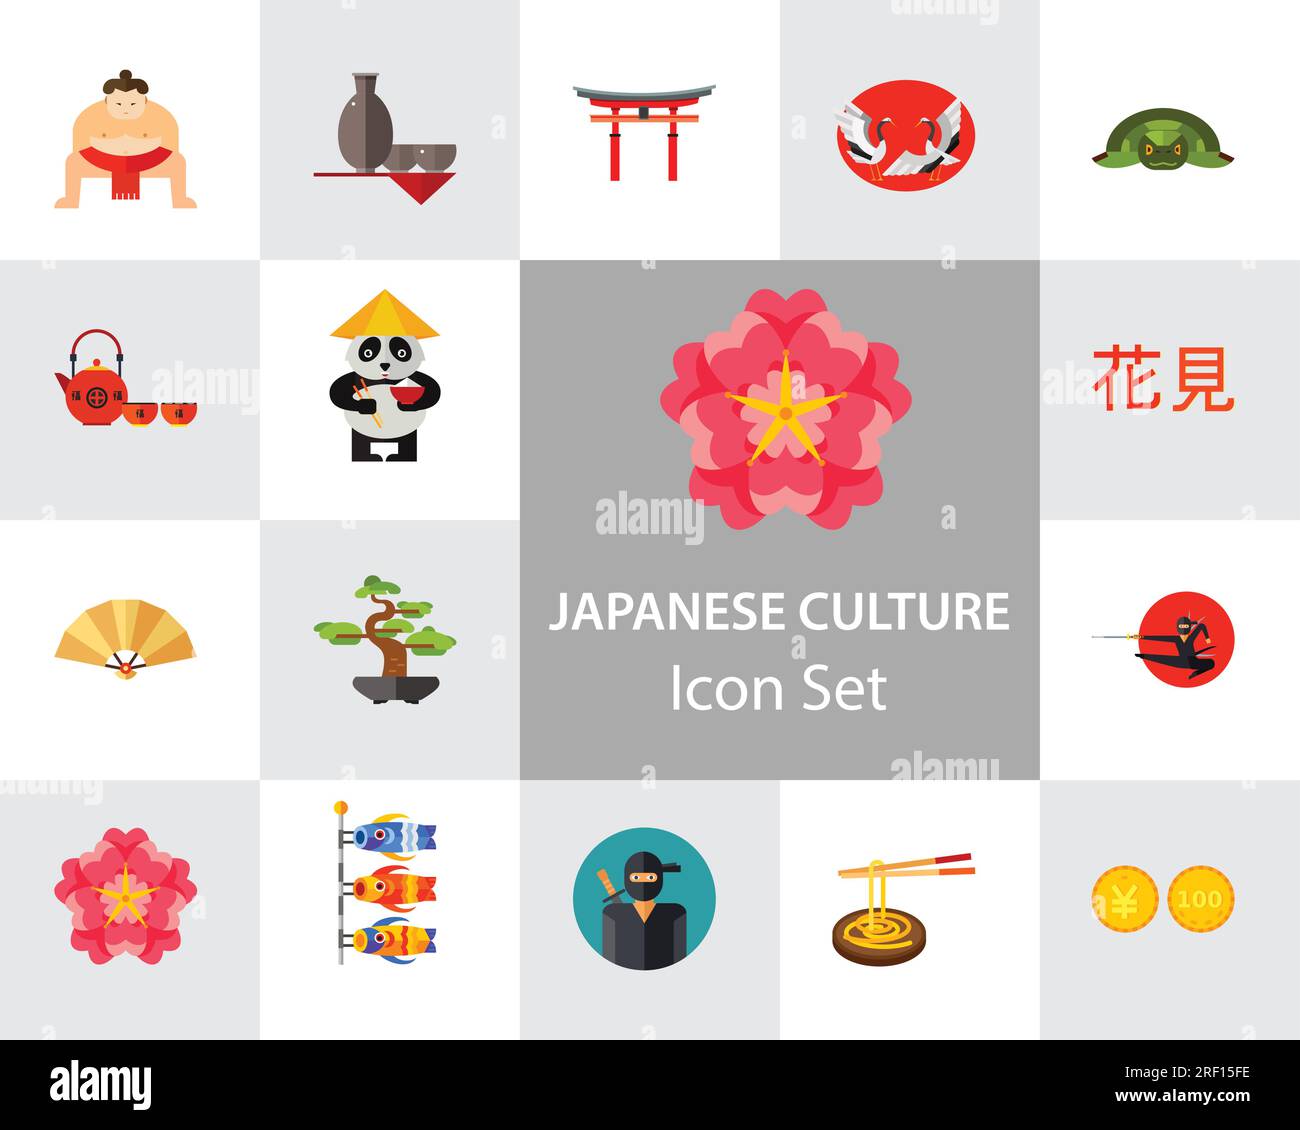 Japanese Culture Icon Set Stock Vector